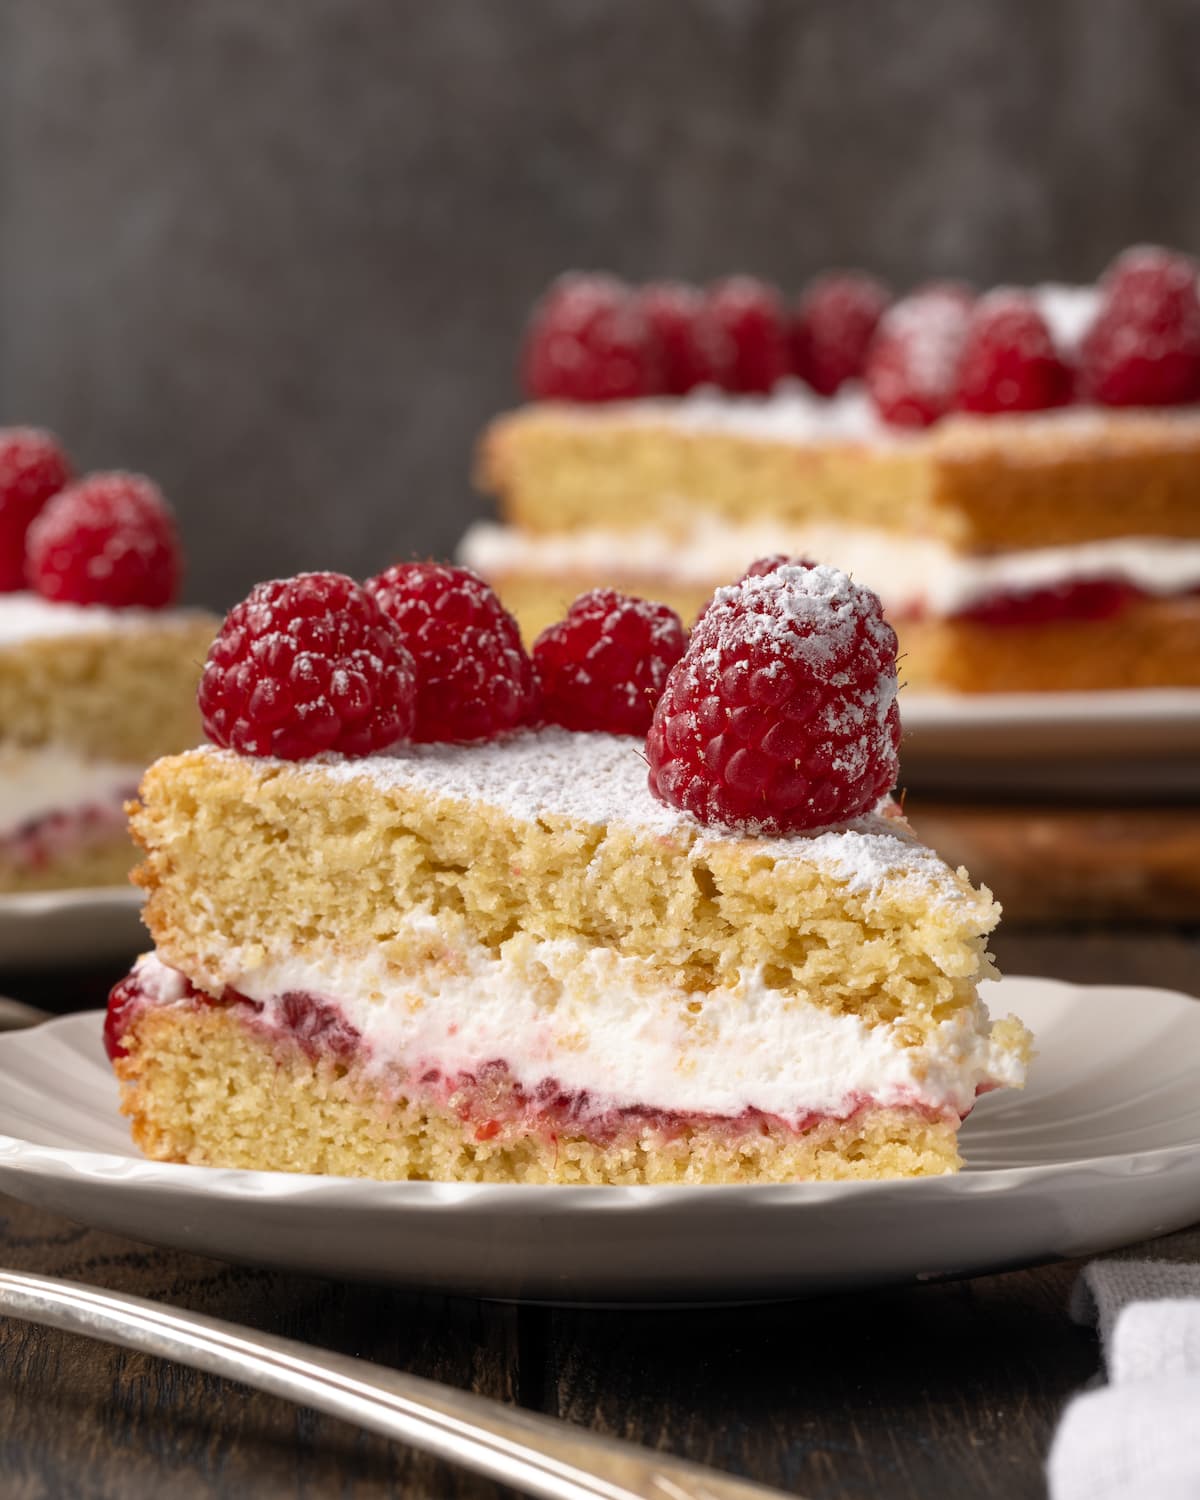 A slice of Victoria sponge cake on a white plate, topped with fresh raspberries, with the rest of the cake on a plate in the background.